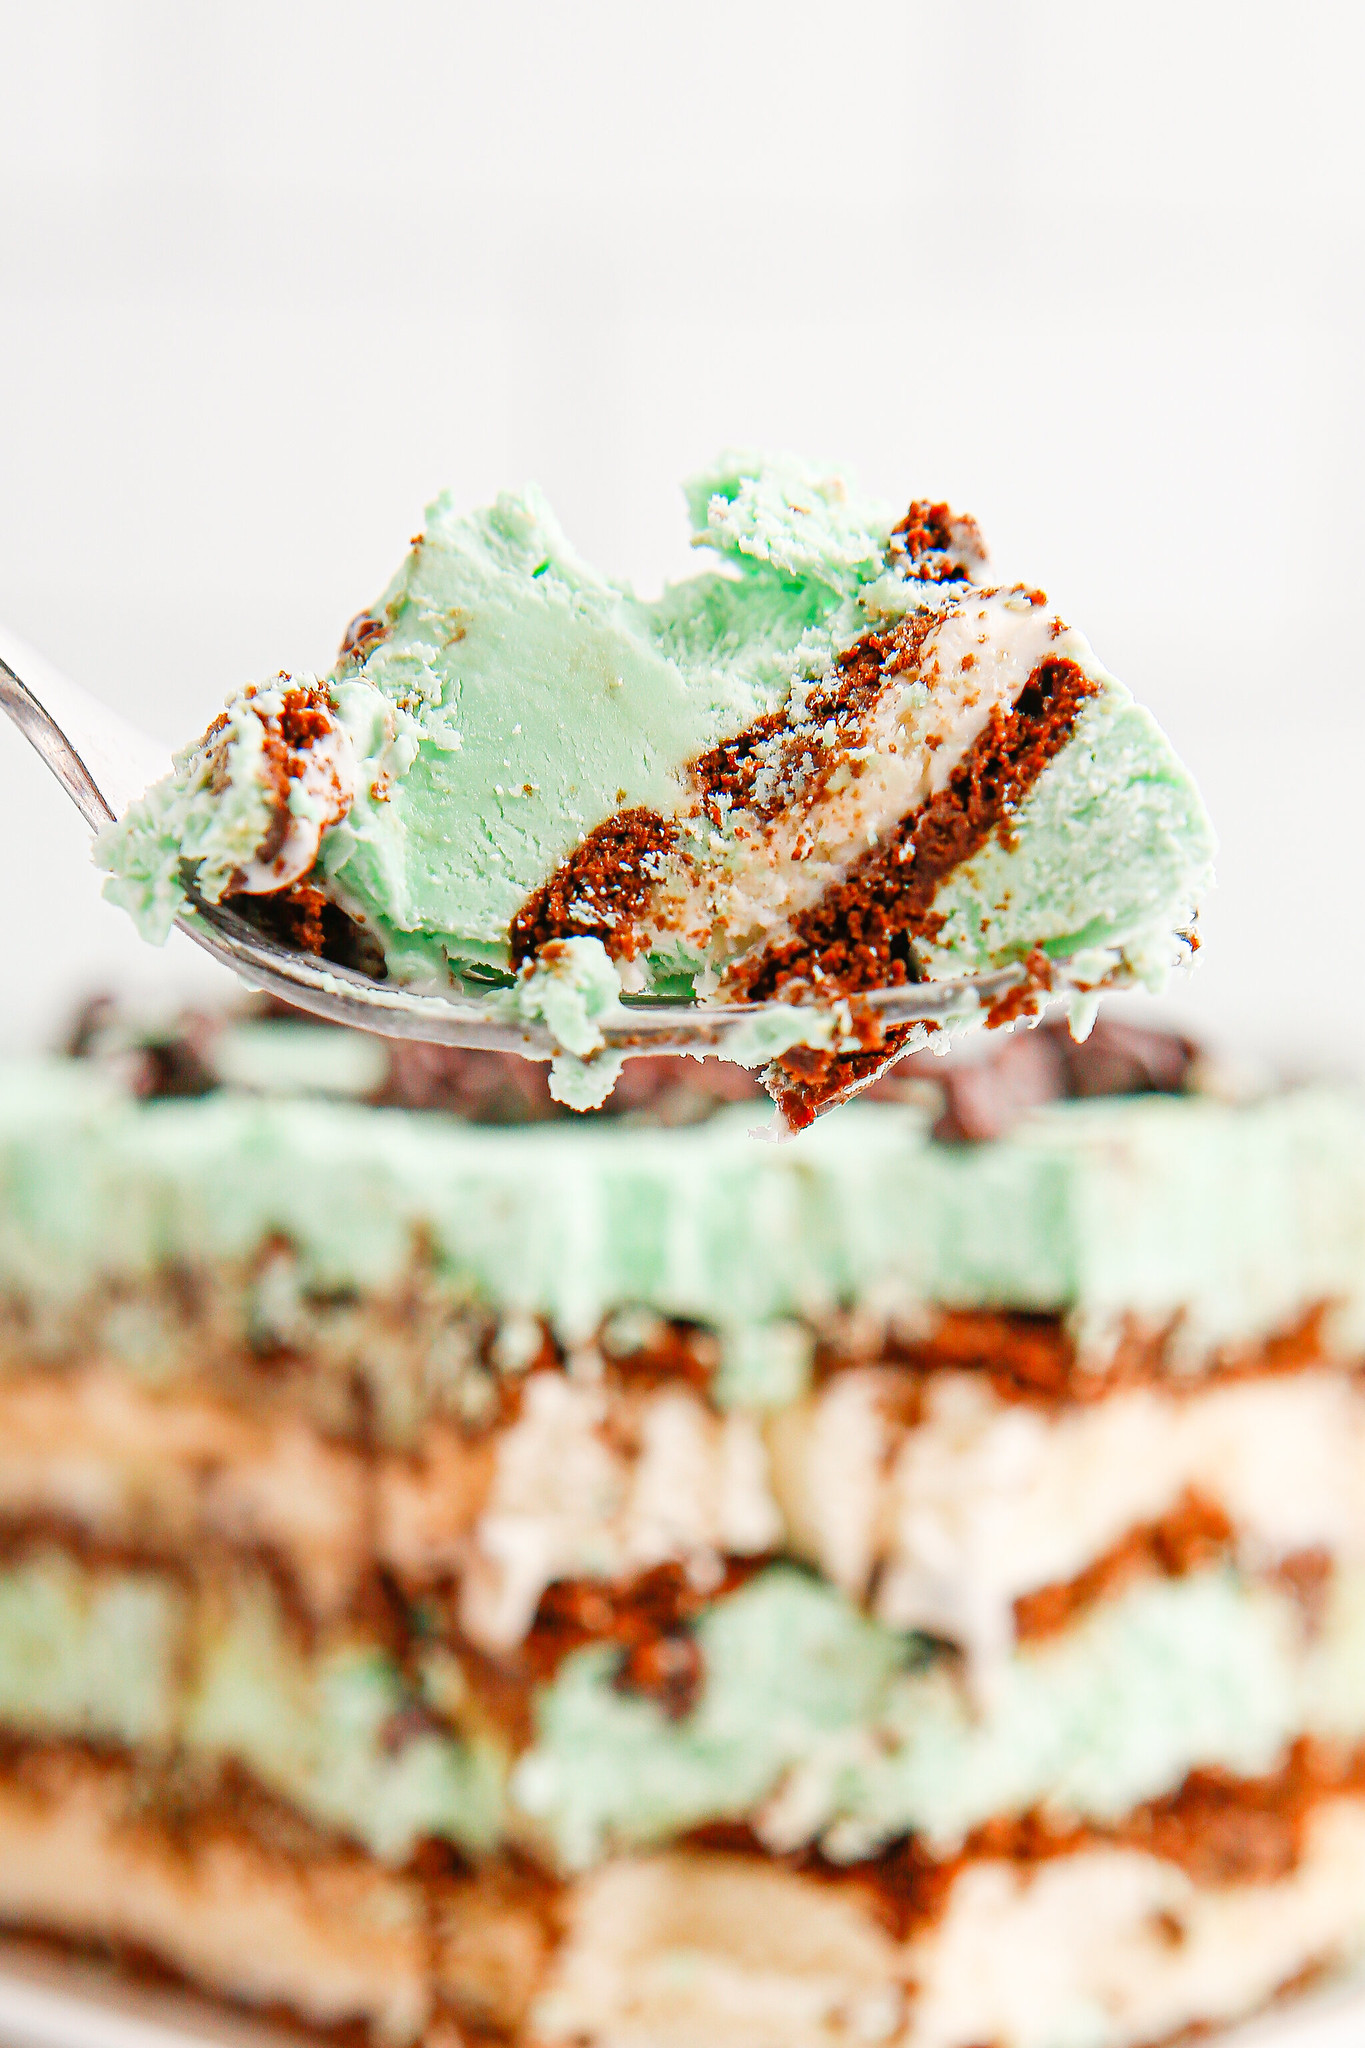 A bite of mint chocolate ice cream cake on a spoon with the rest of the cake in the background